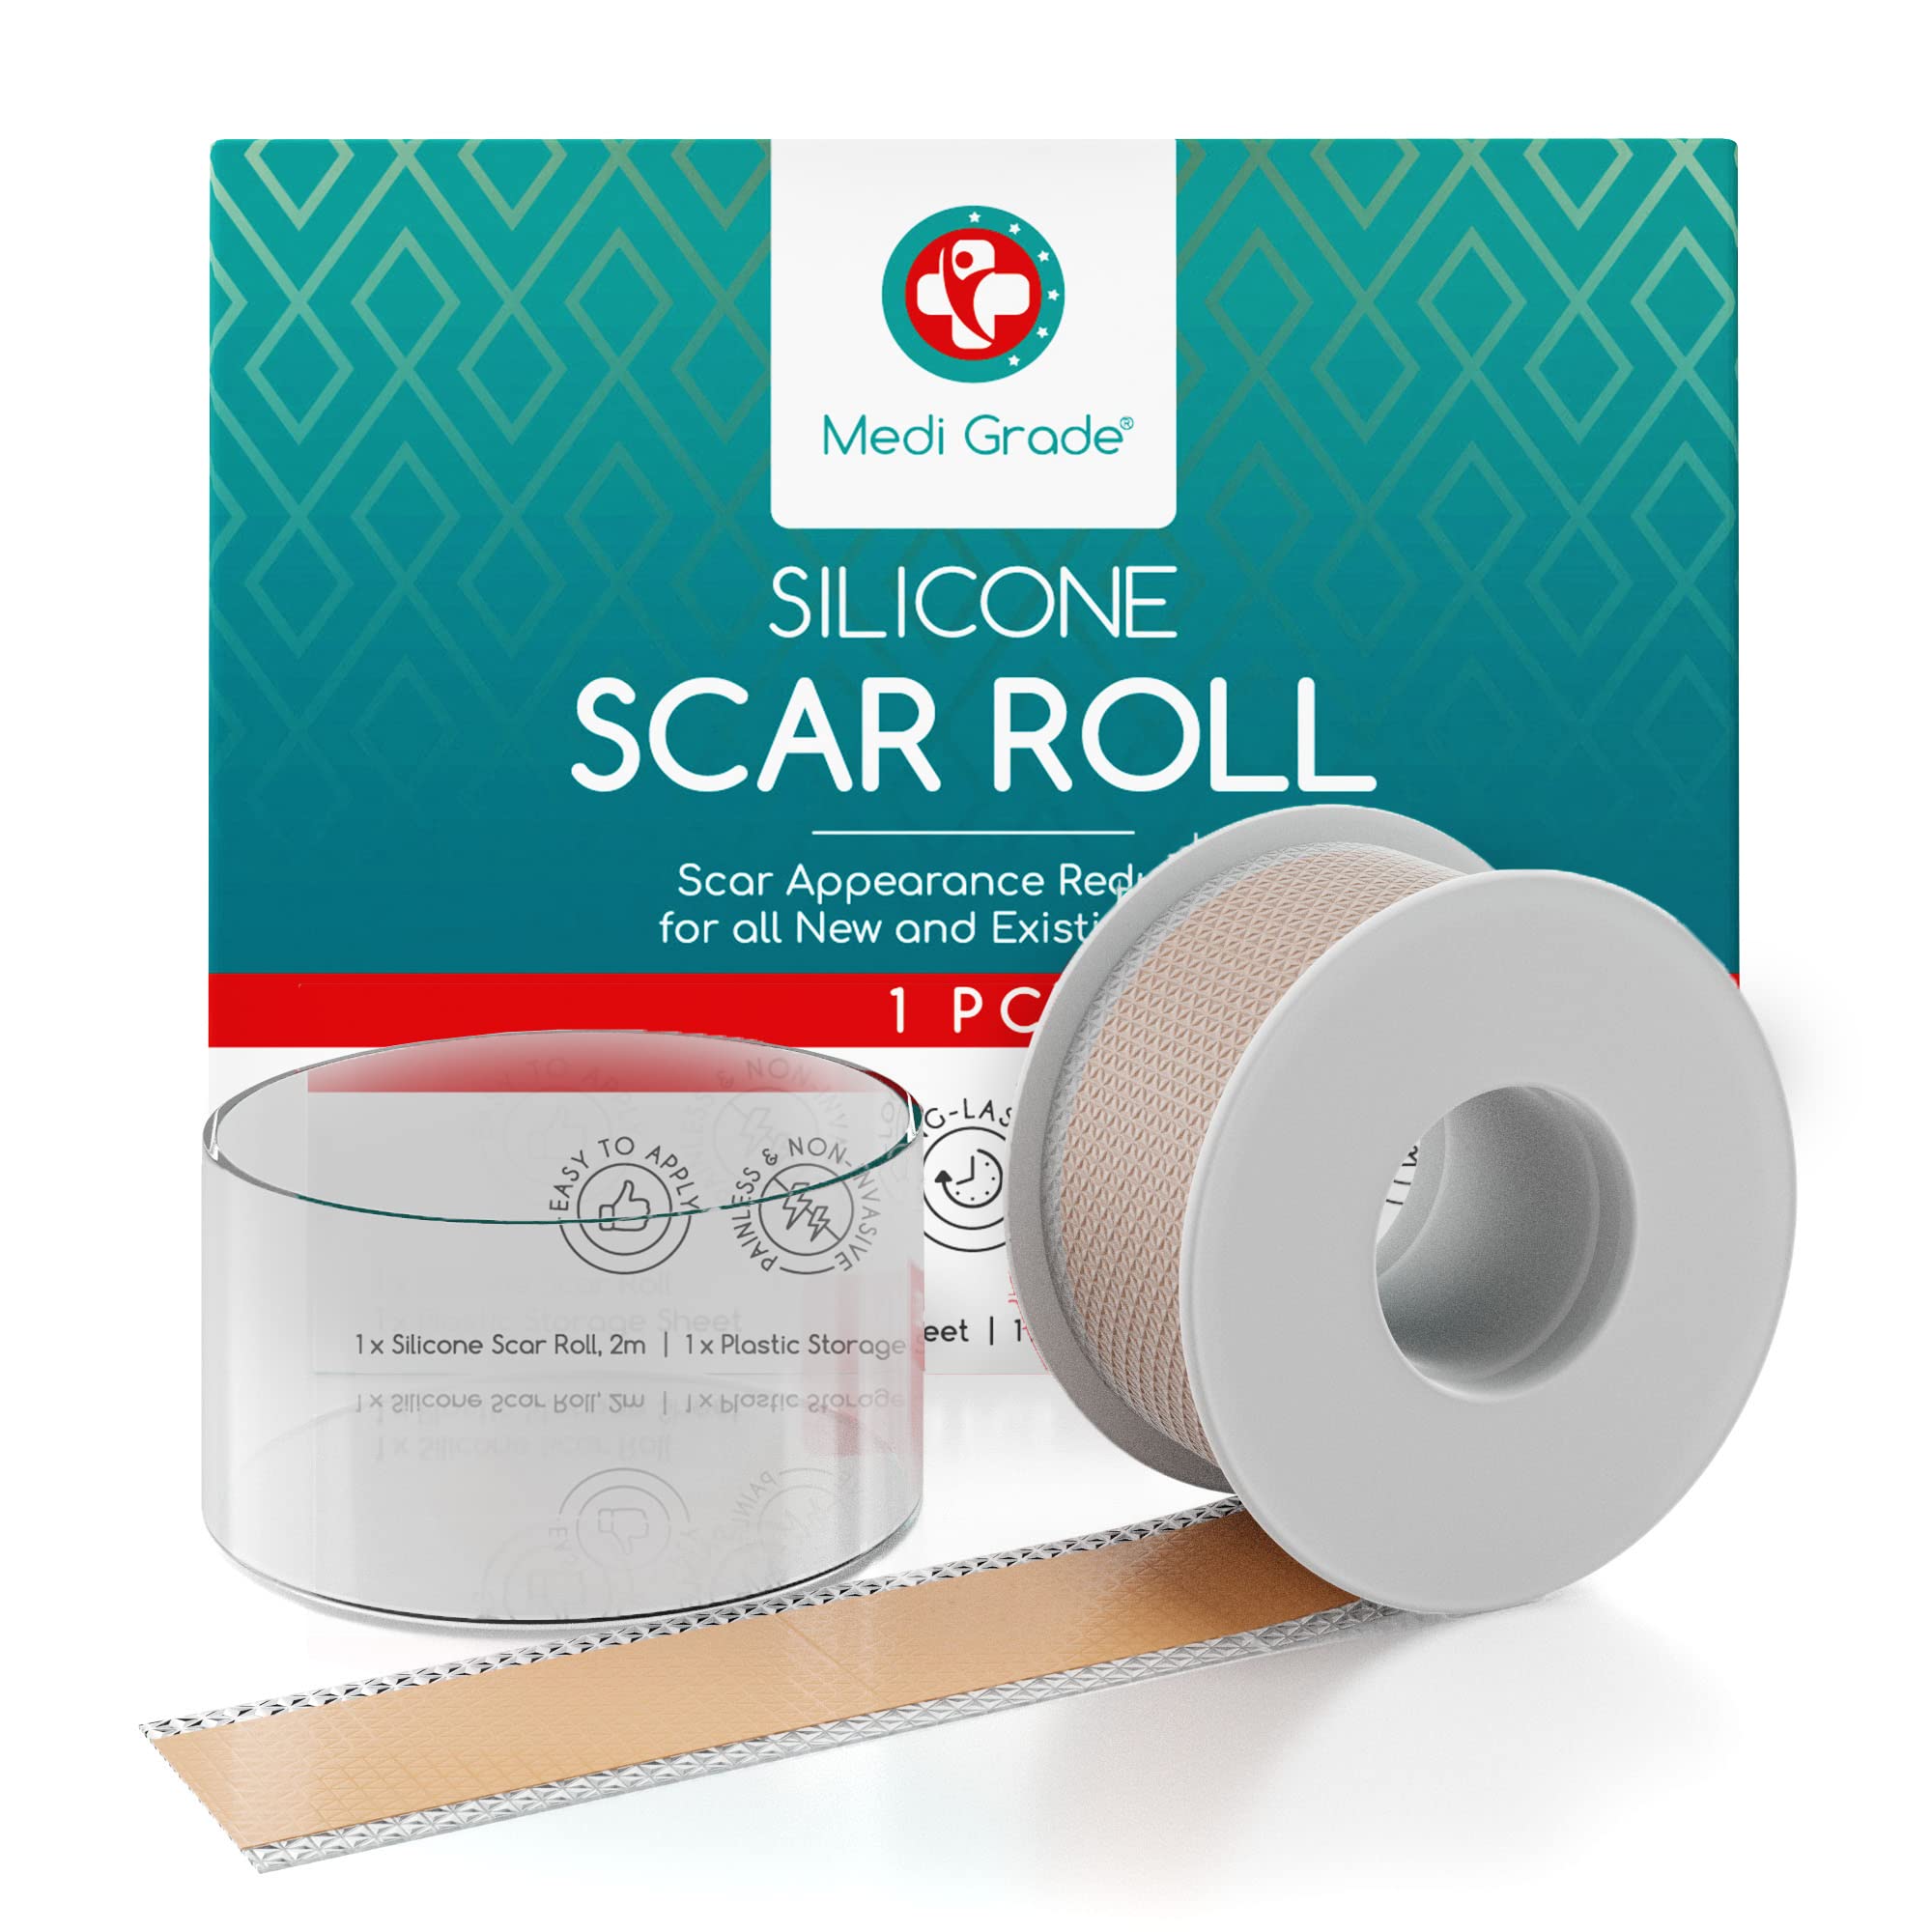 3 Pack Silicone Scar Sheets,Medical Grade Soft Silicone Scar Tape, Strips, Roll - Scars Removal Treatment,8Pcs/Pack, Size: One size, Other